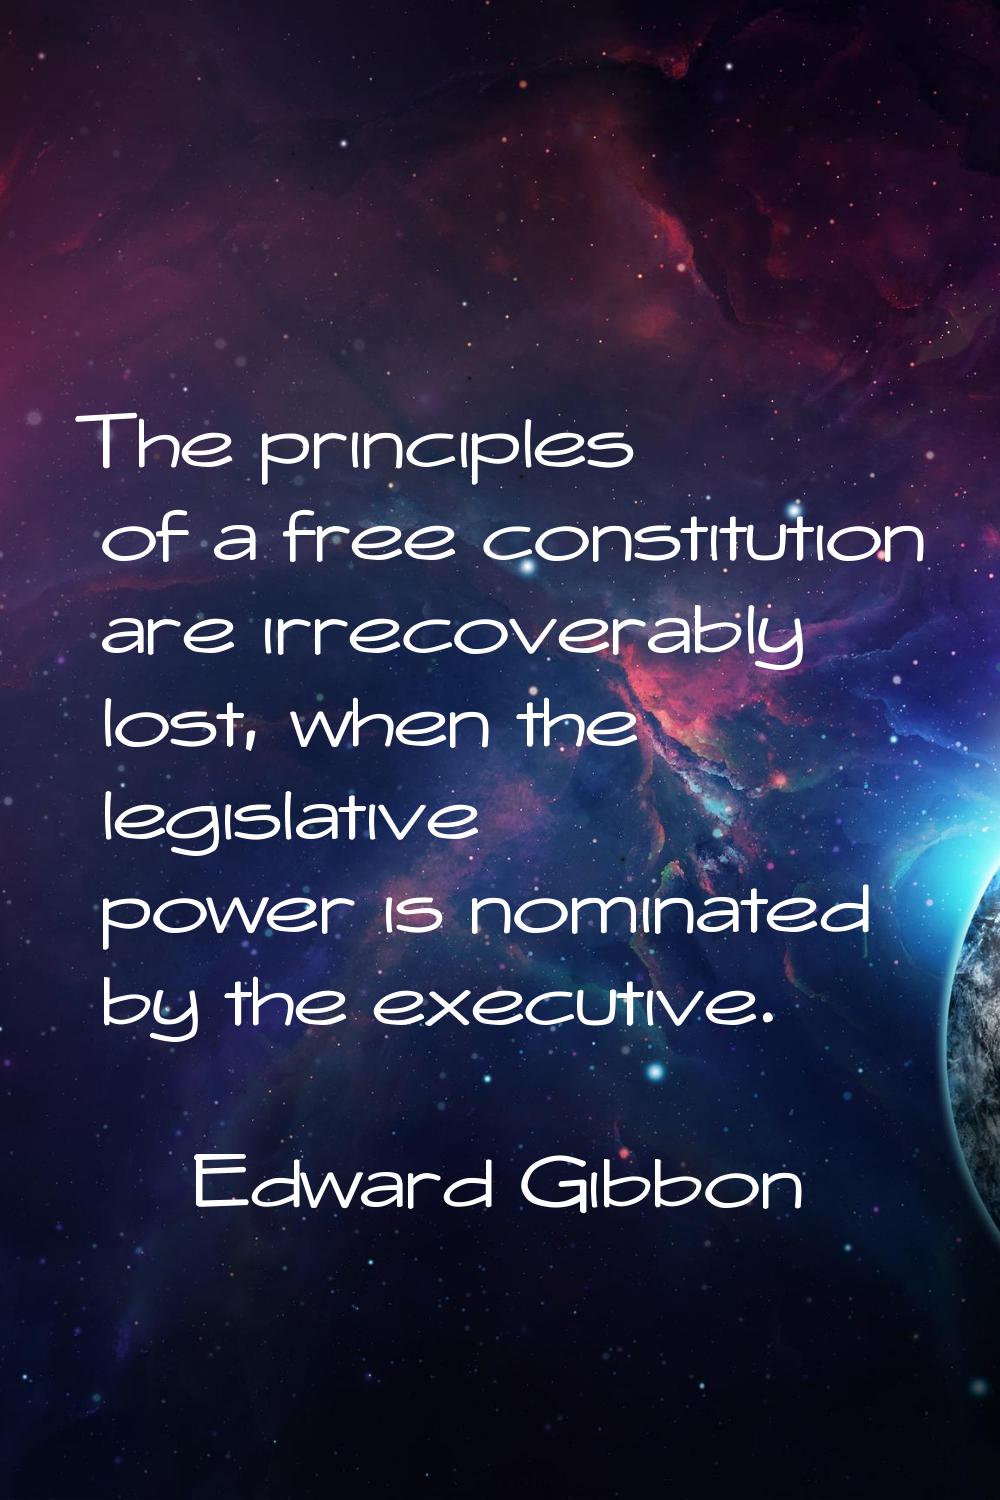 The principles of a free constitution are irrecoverably lost, when the legislative power is nominat